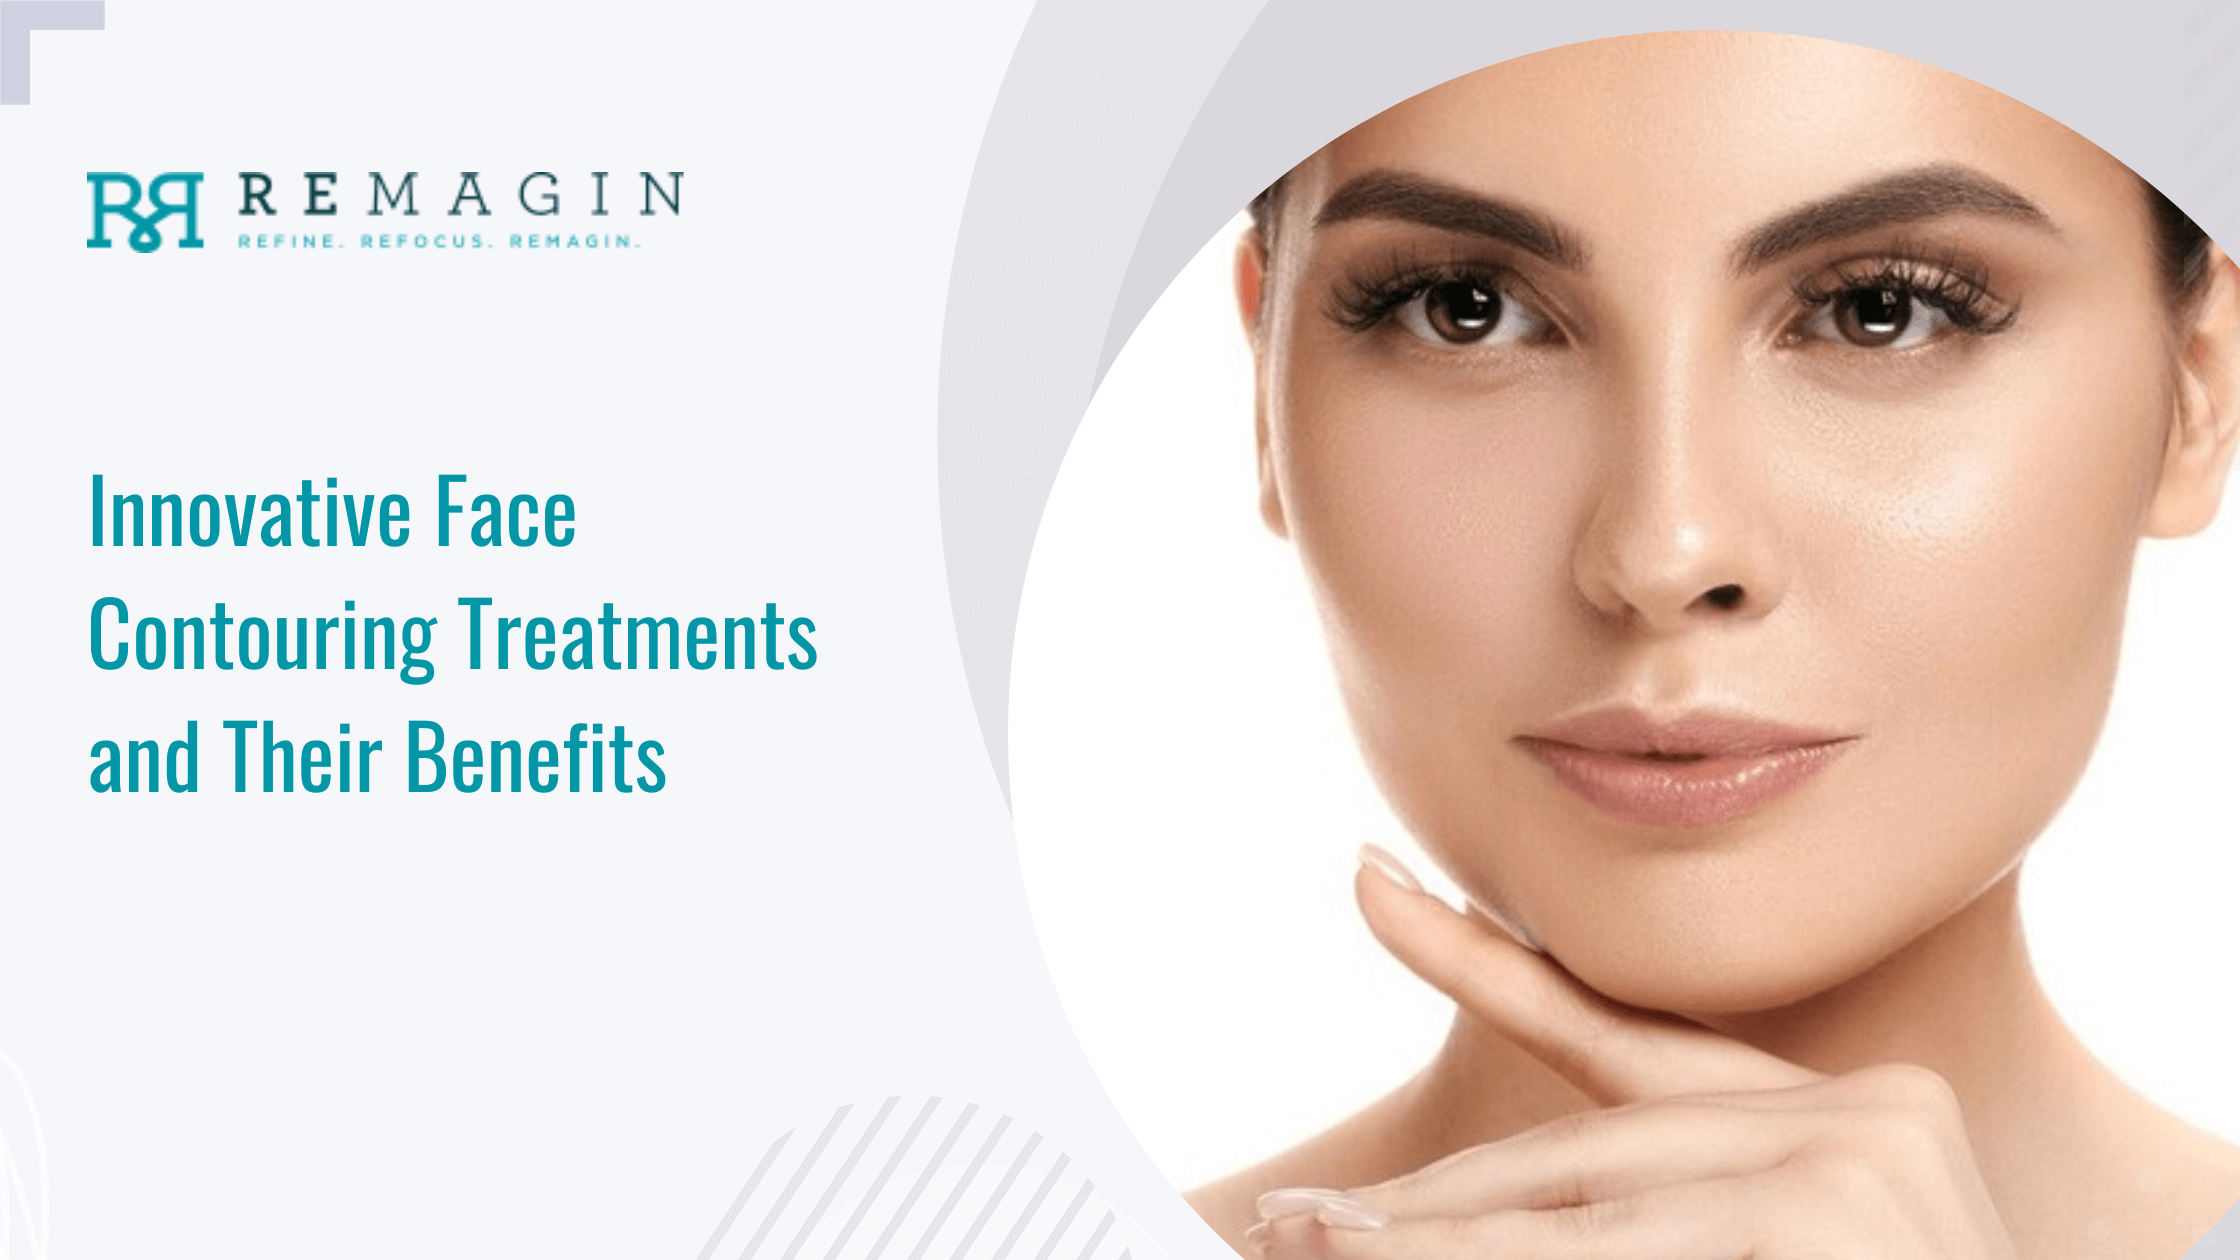 Innovative Face Contouring Treatments and Their Benefits